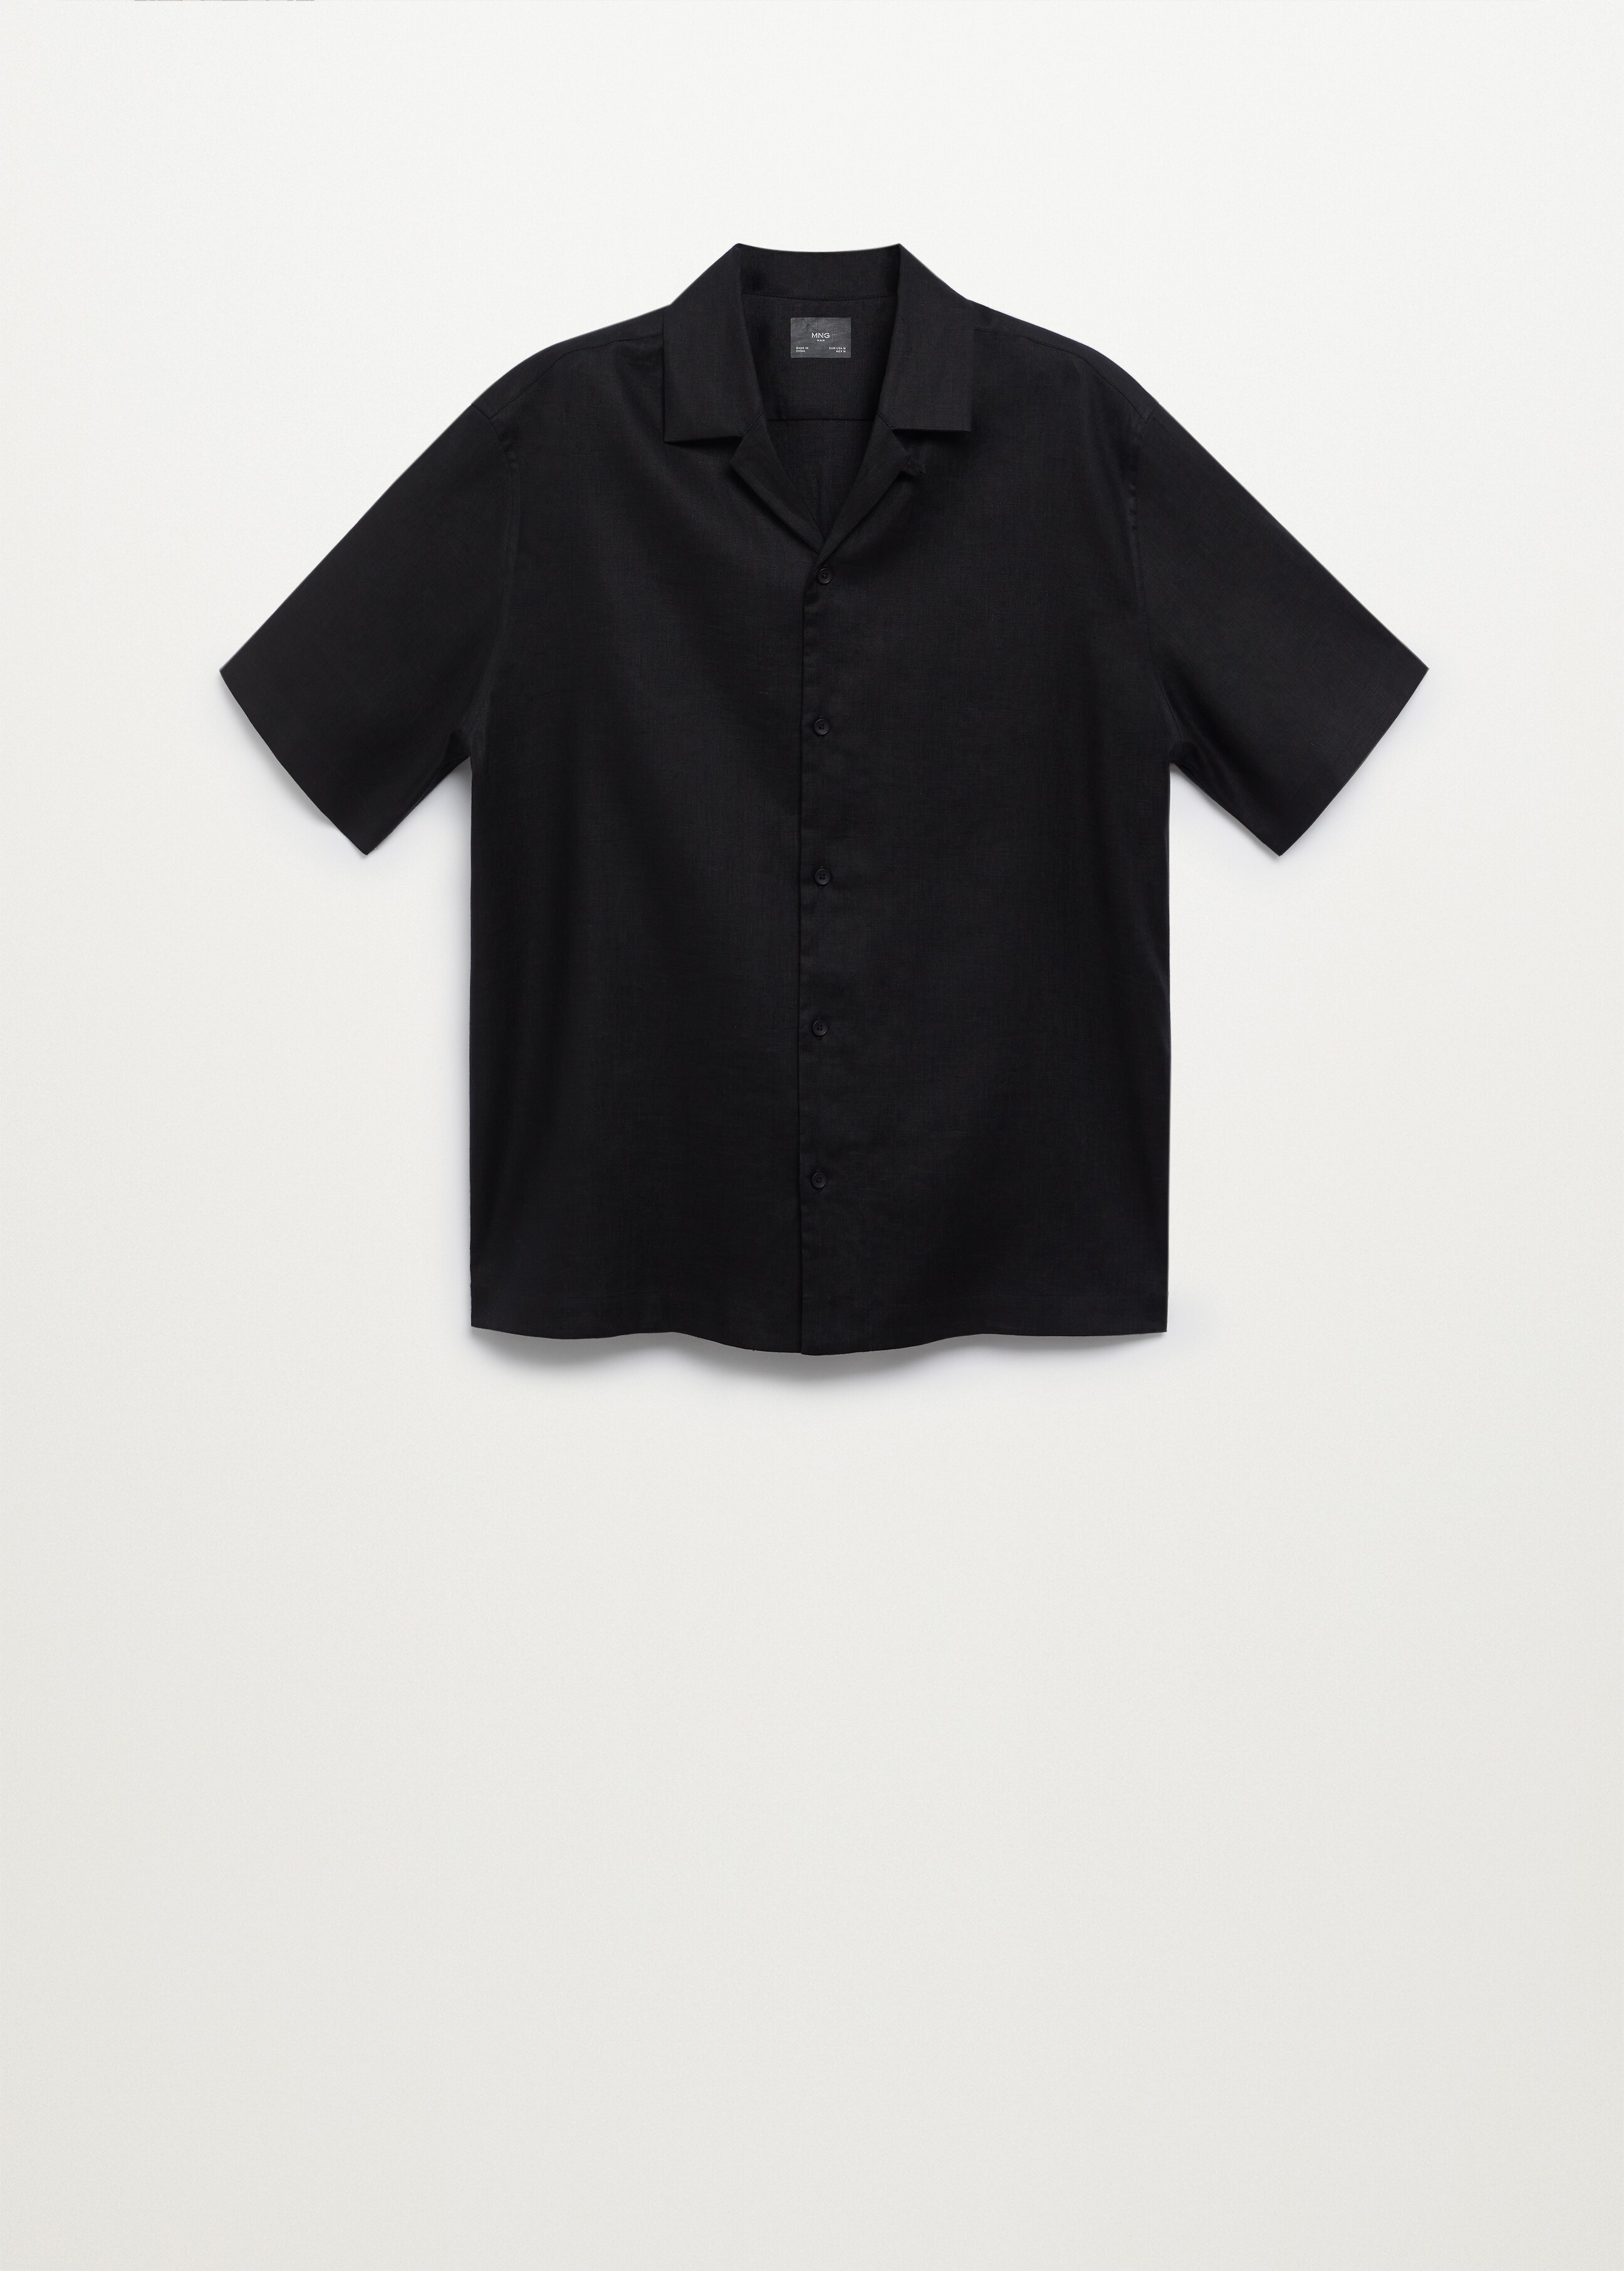 Breathable linen bowling shirt - Article without model